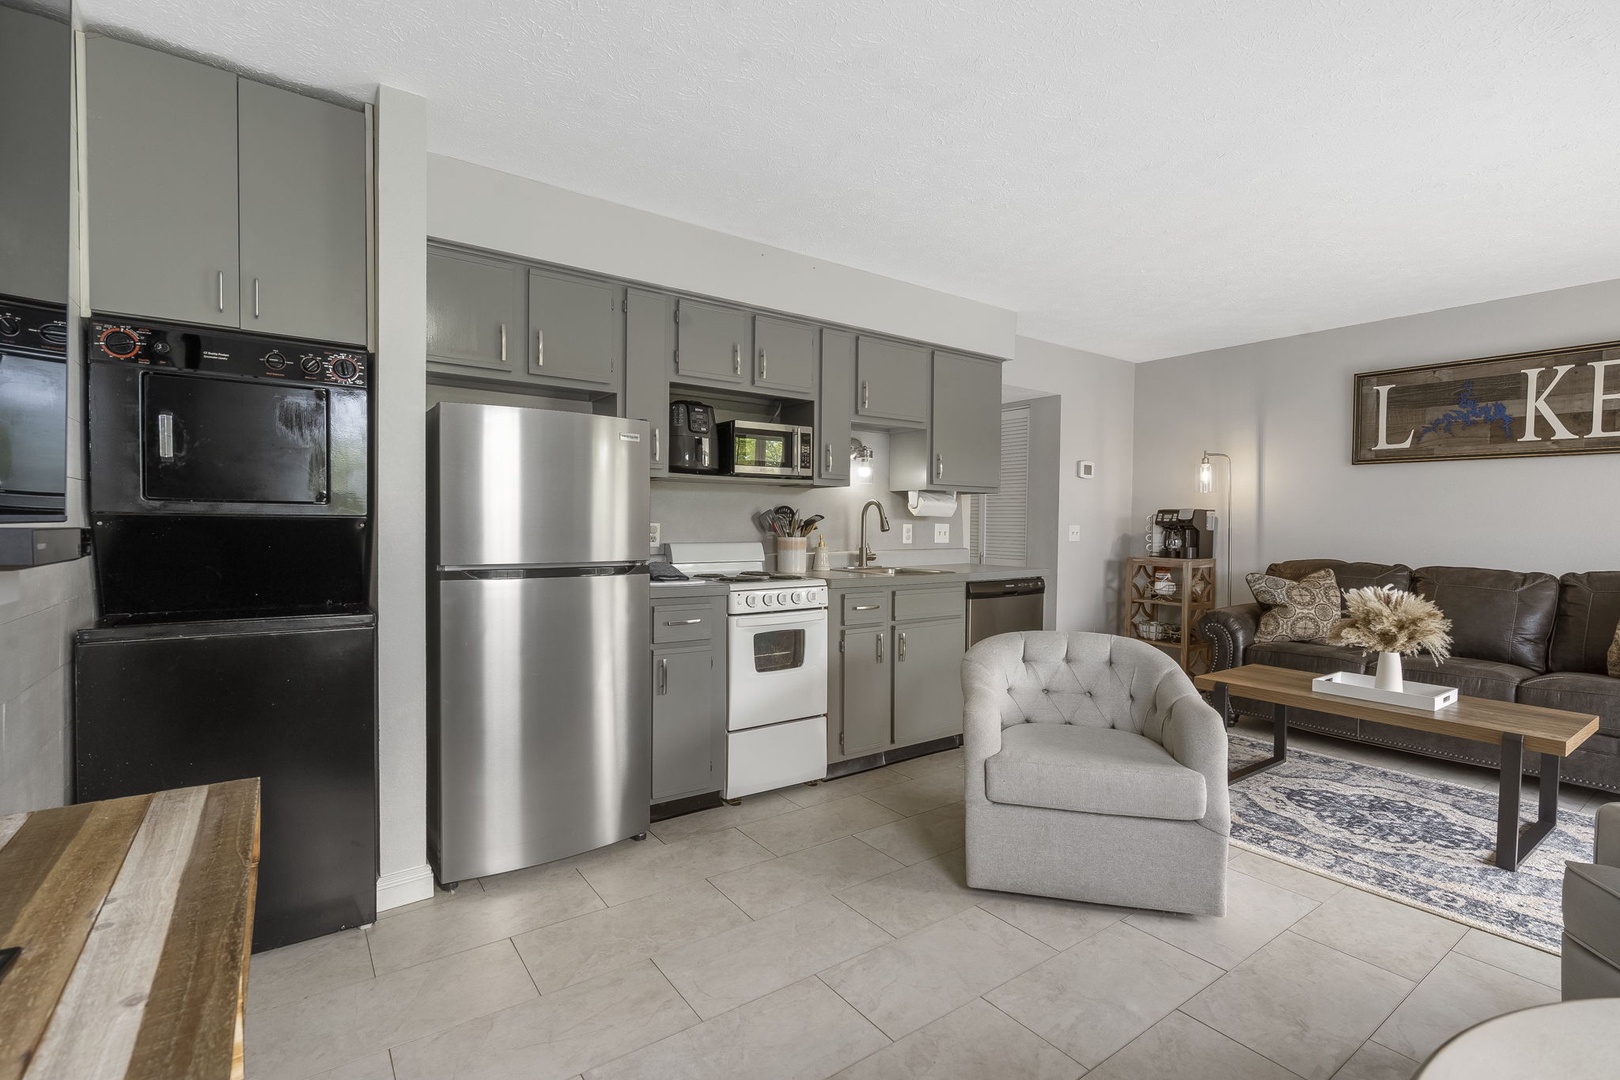 Open concept Kitchen and Living Spaces provide the perfect cozy spot to relax